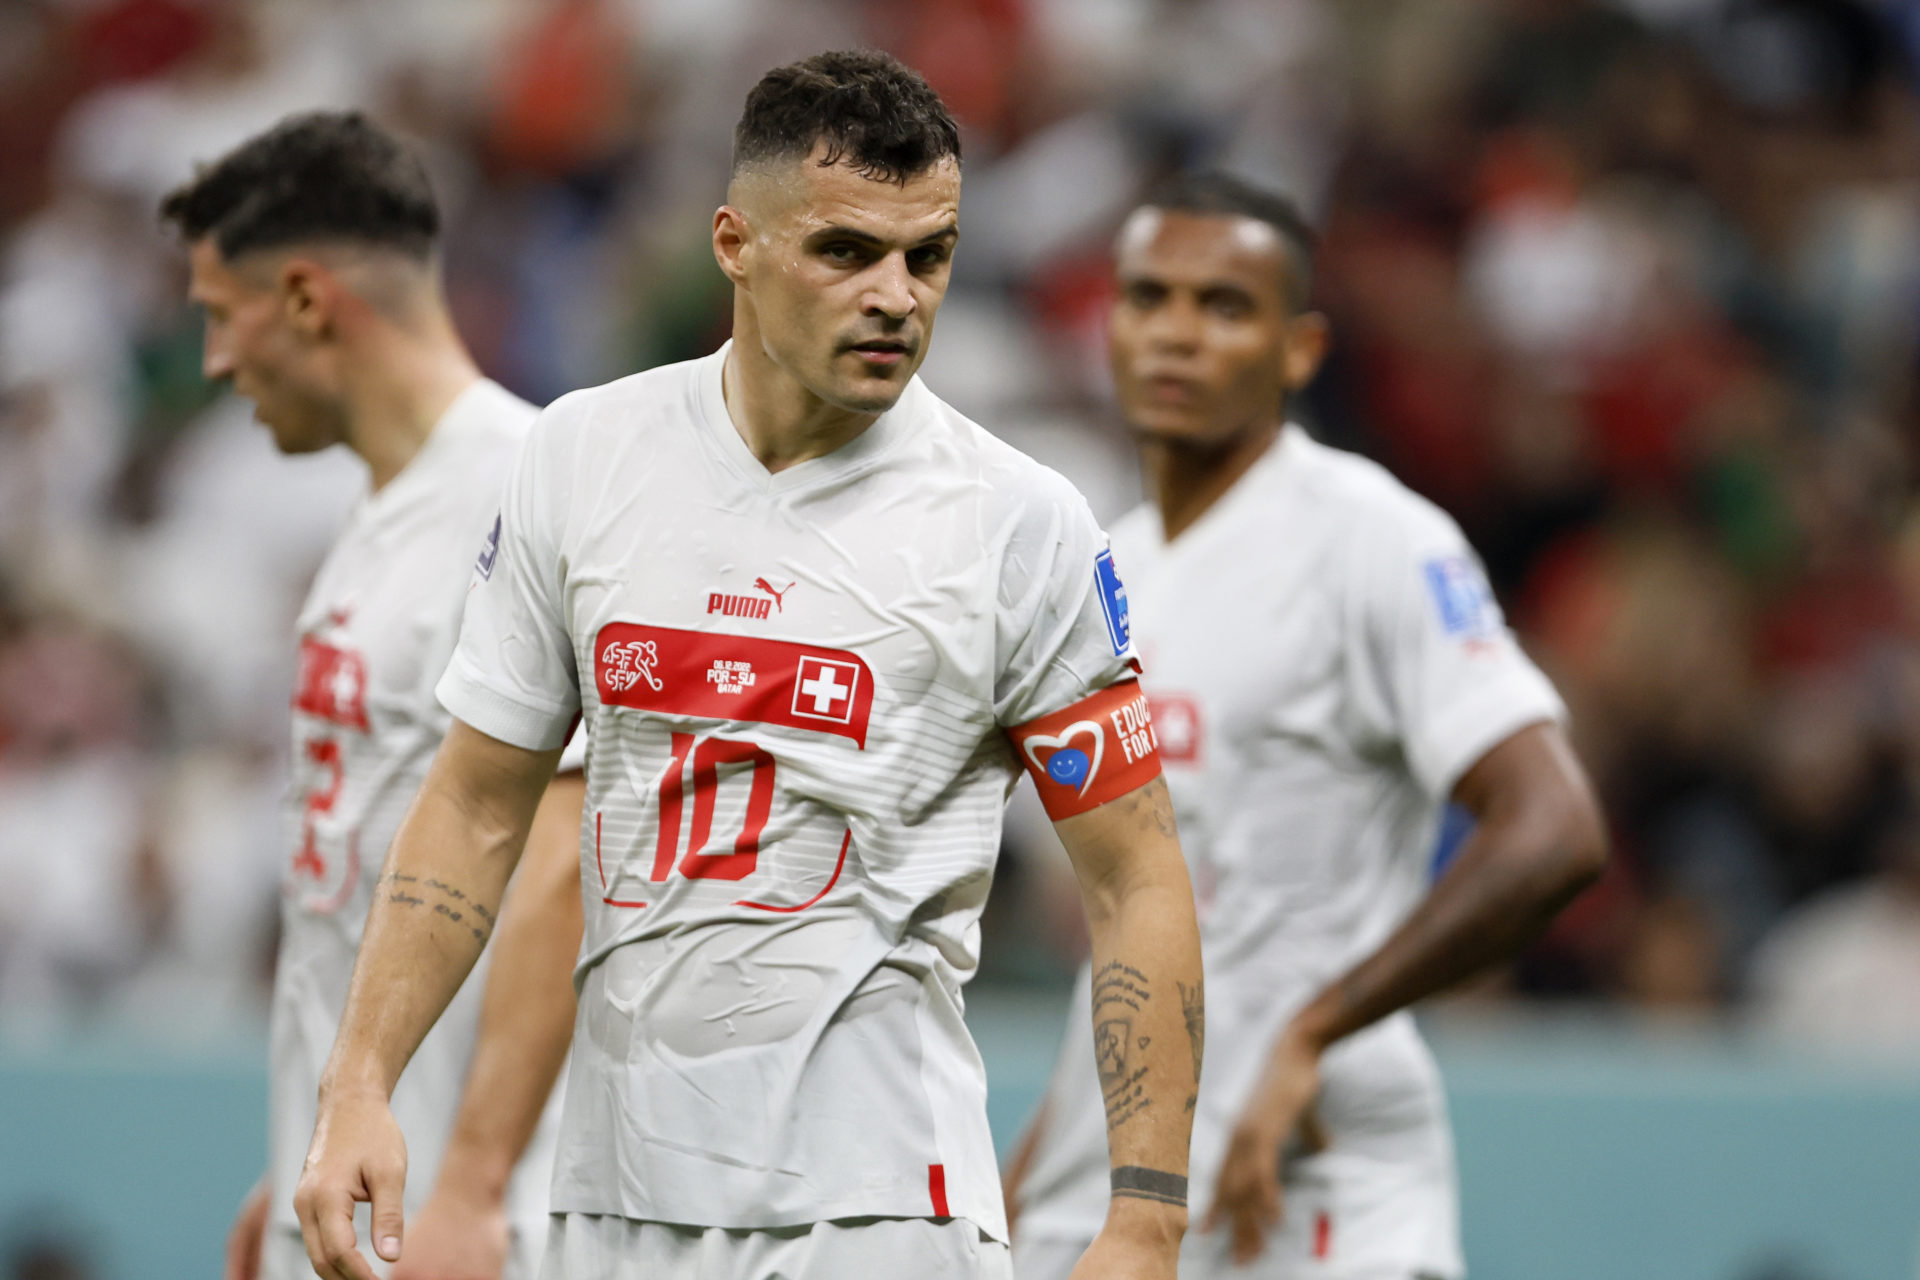 Xhaka could play against Juventus